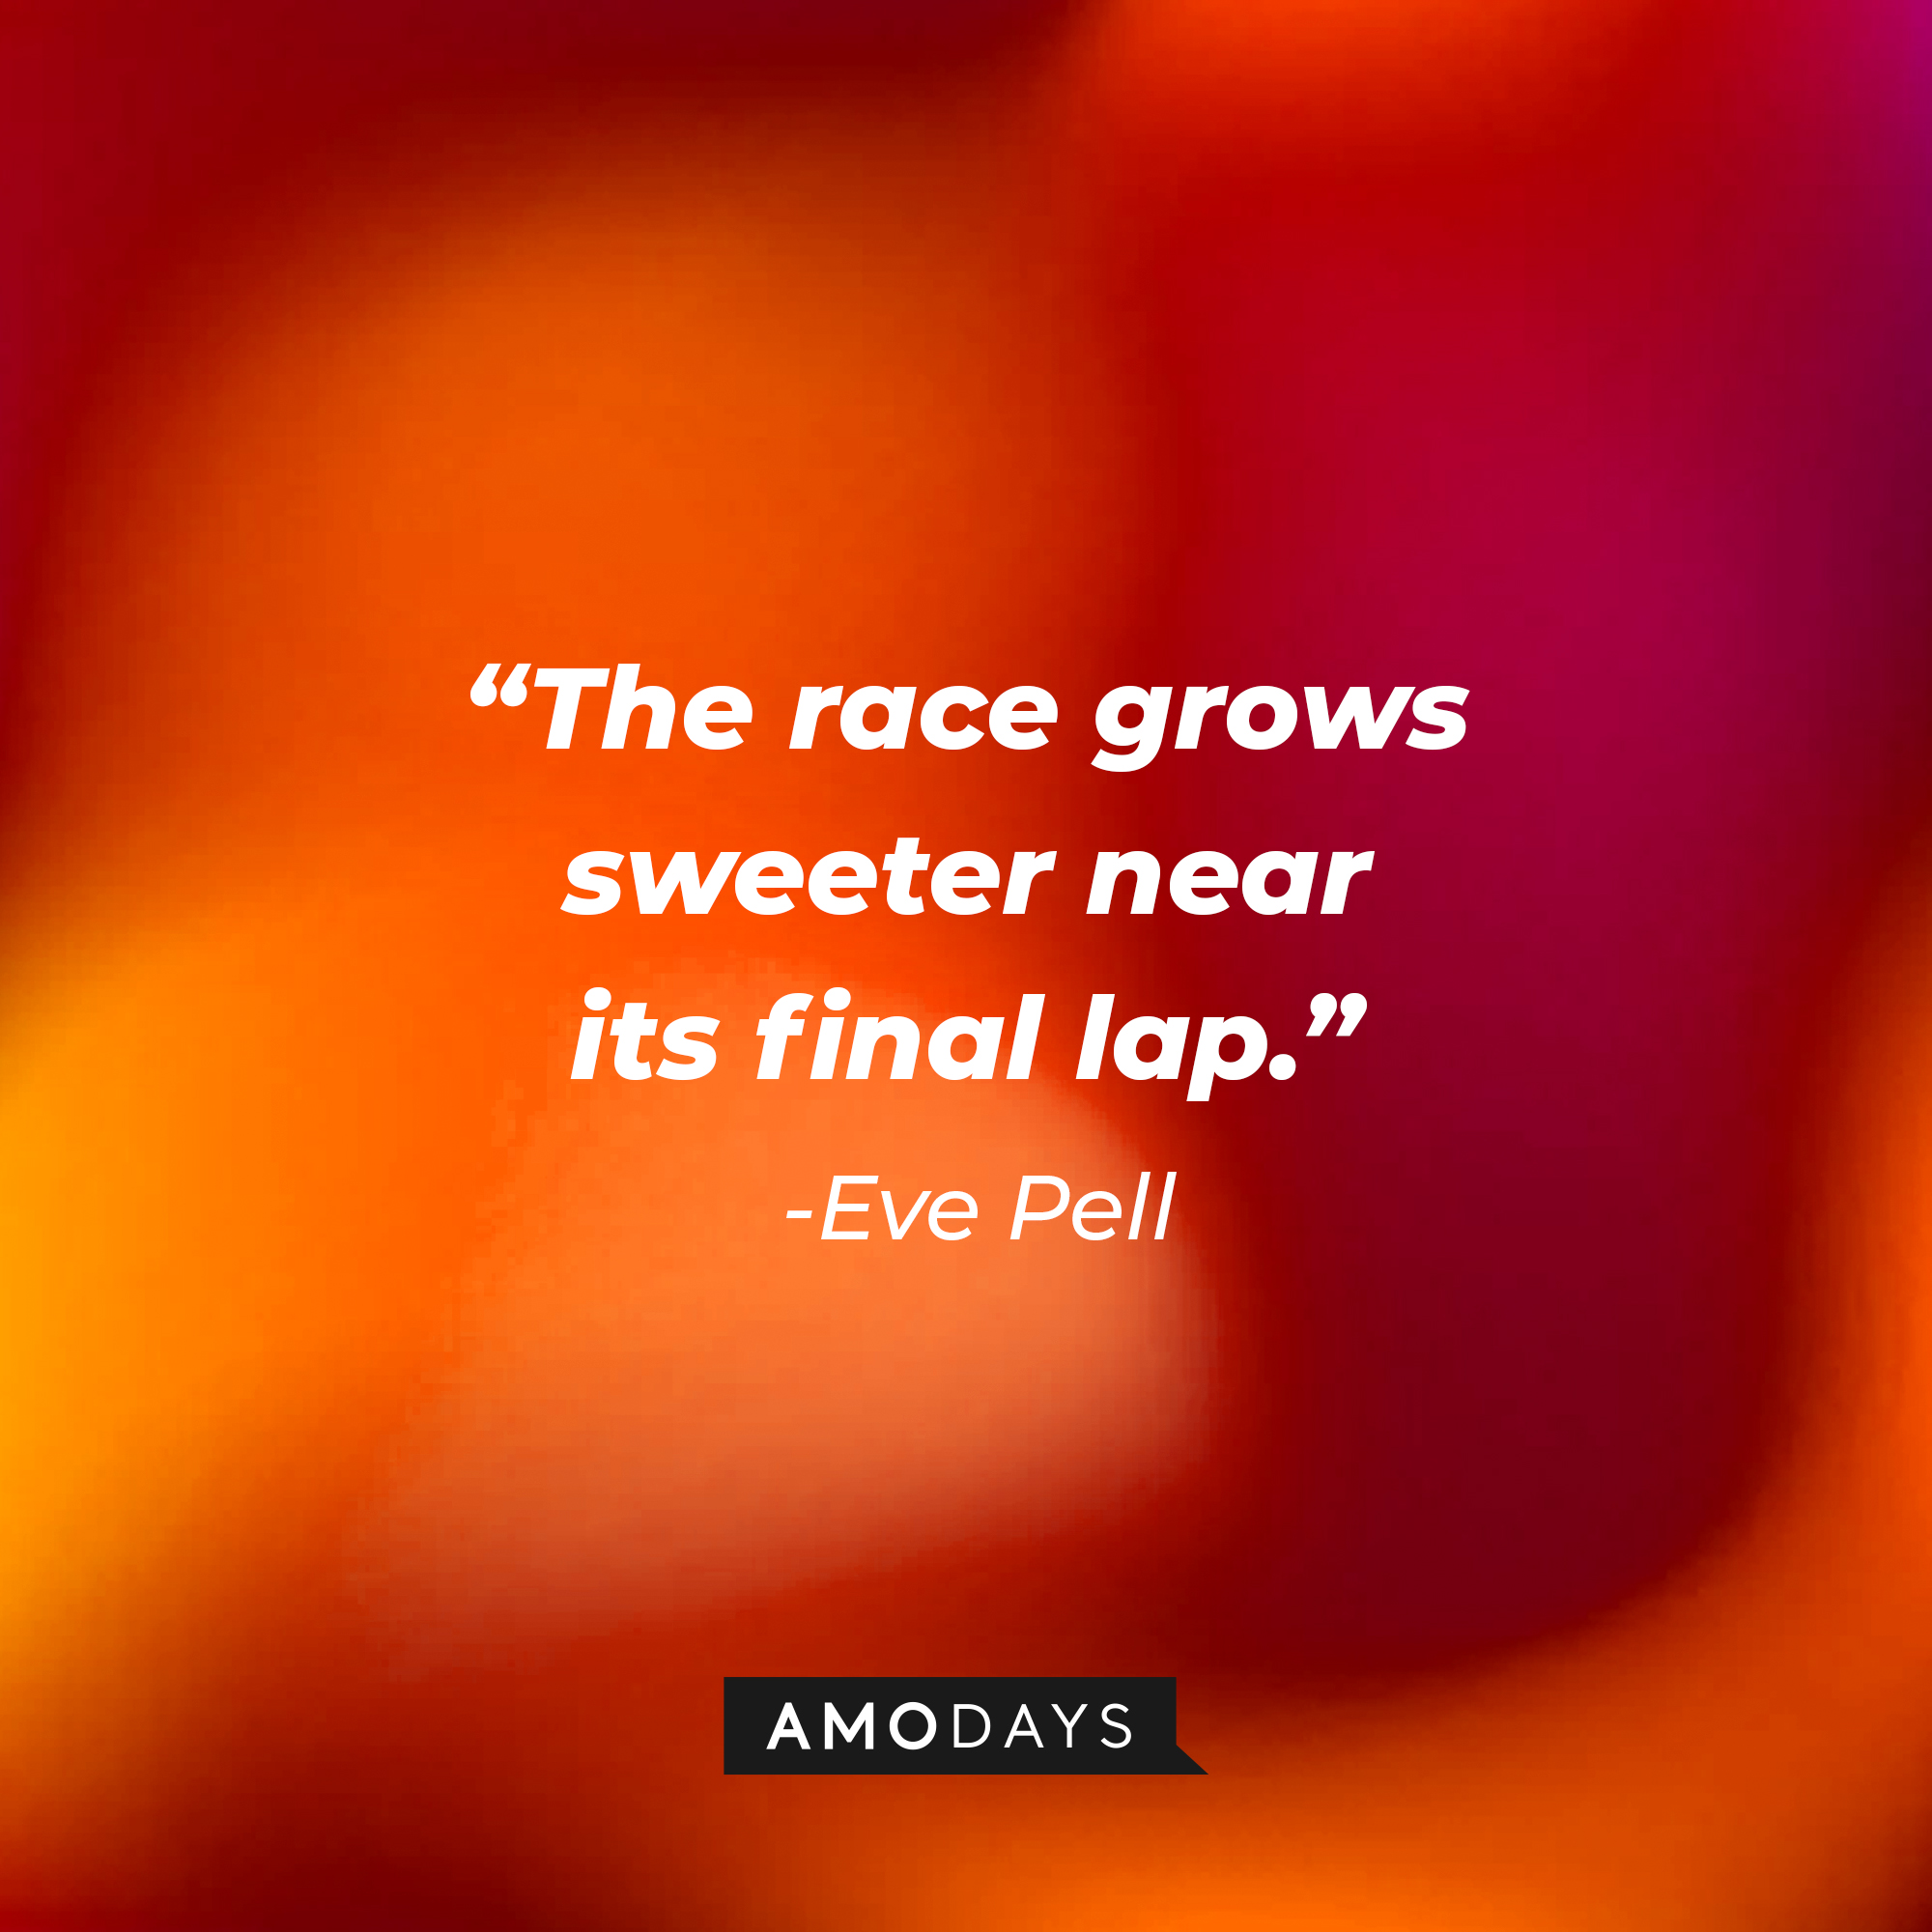 Eve Pell’s quote from “Modern Love”: “The race grows sweeter near its final lap.”  | Source: AmoDays